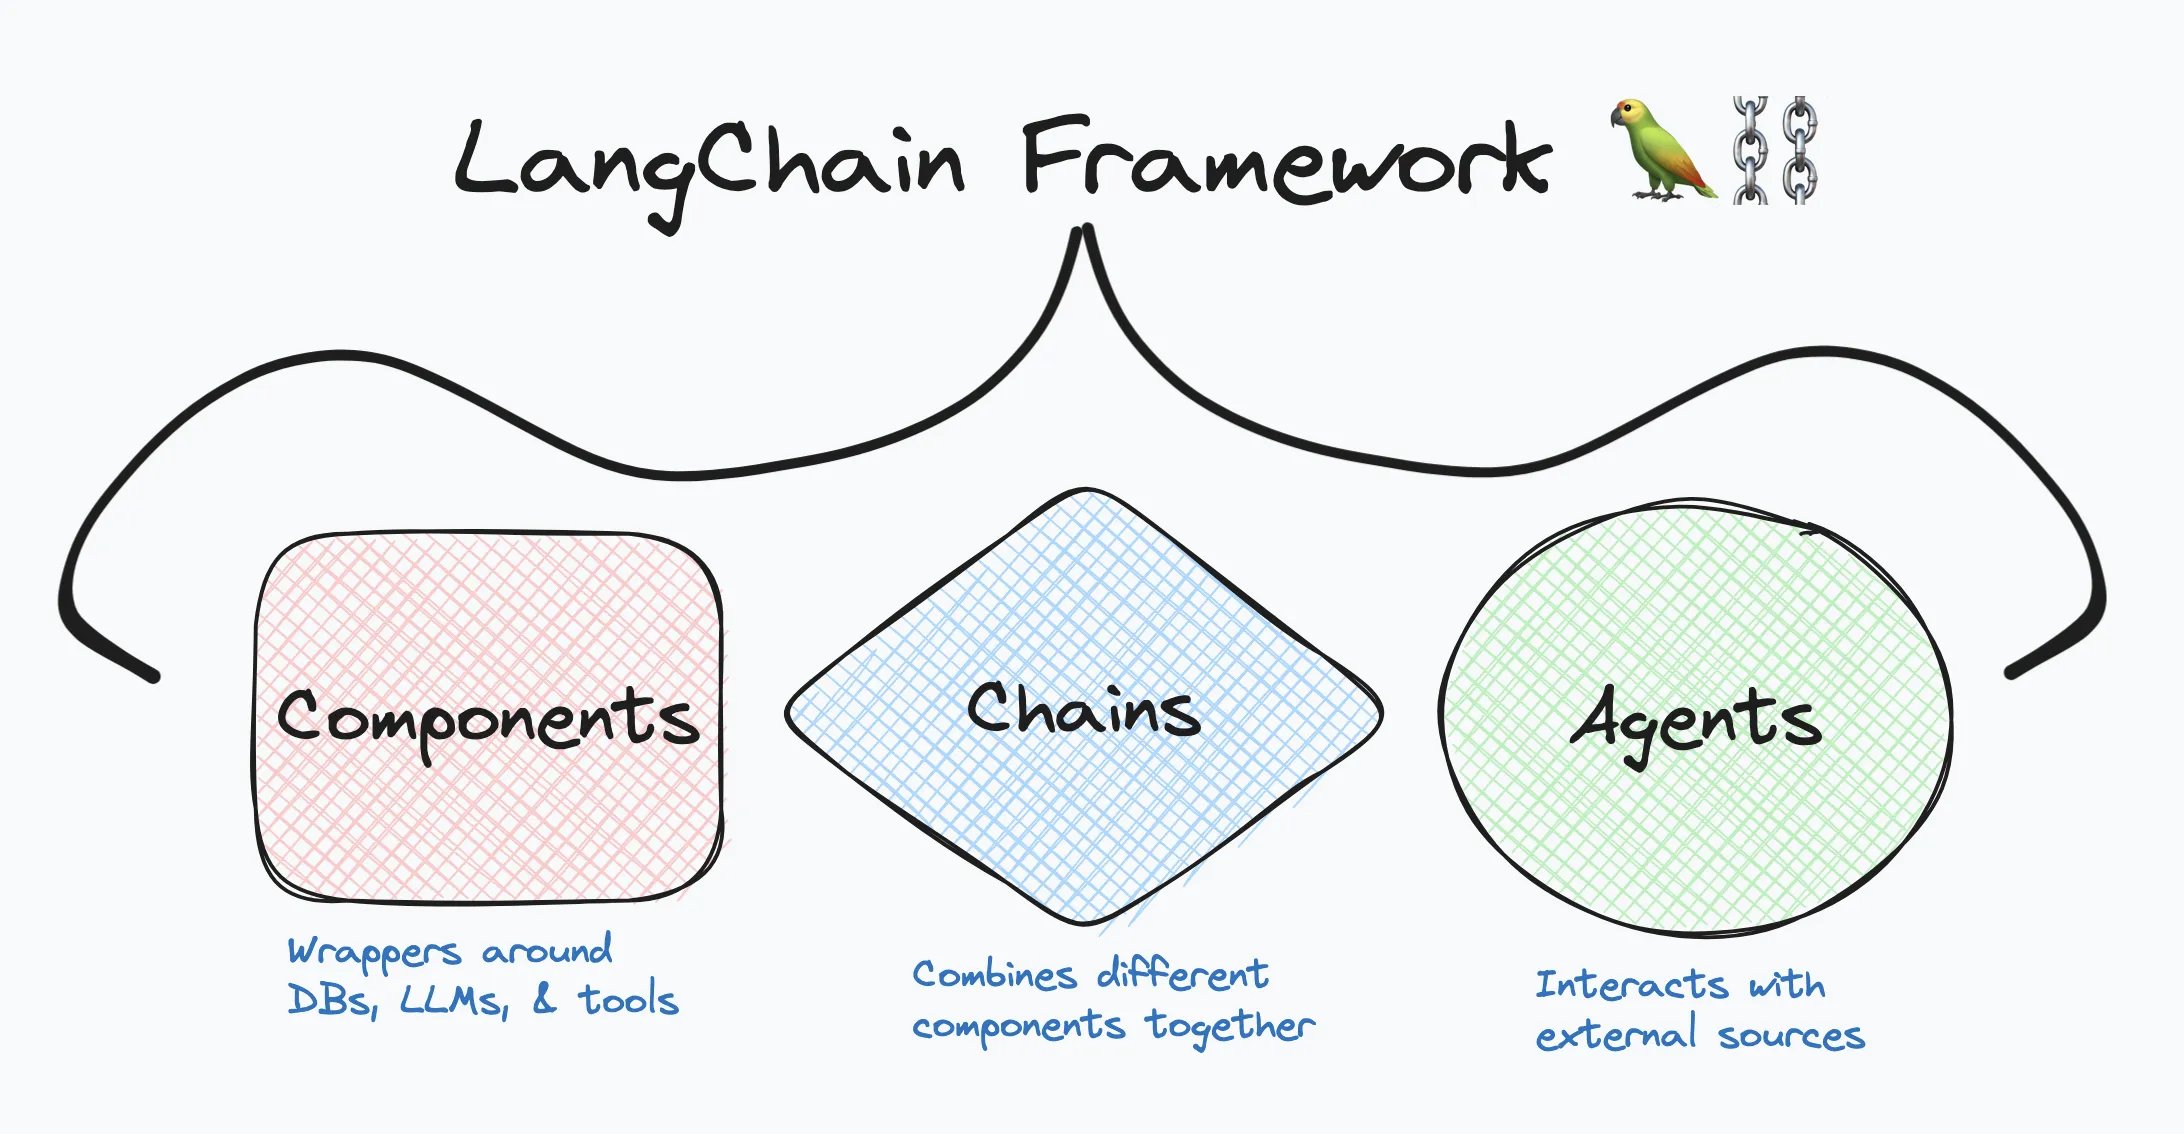 Overview of LangChain components